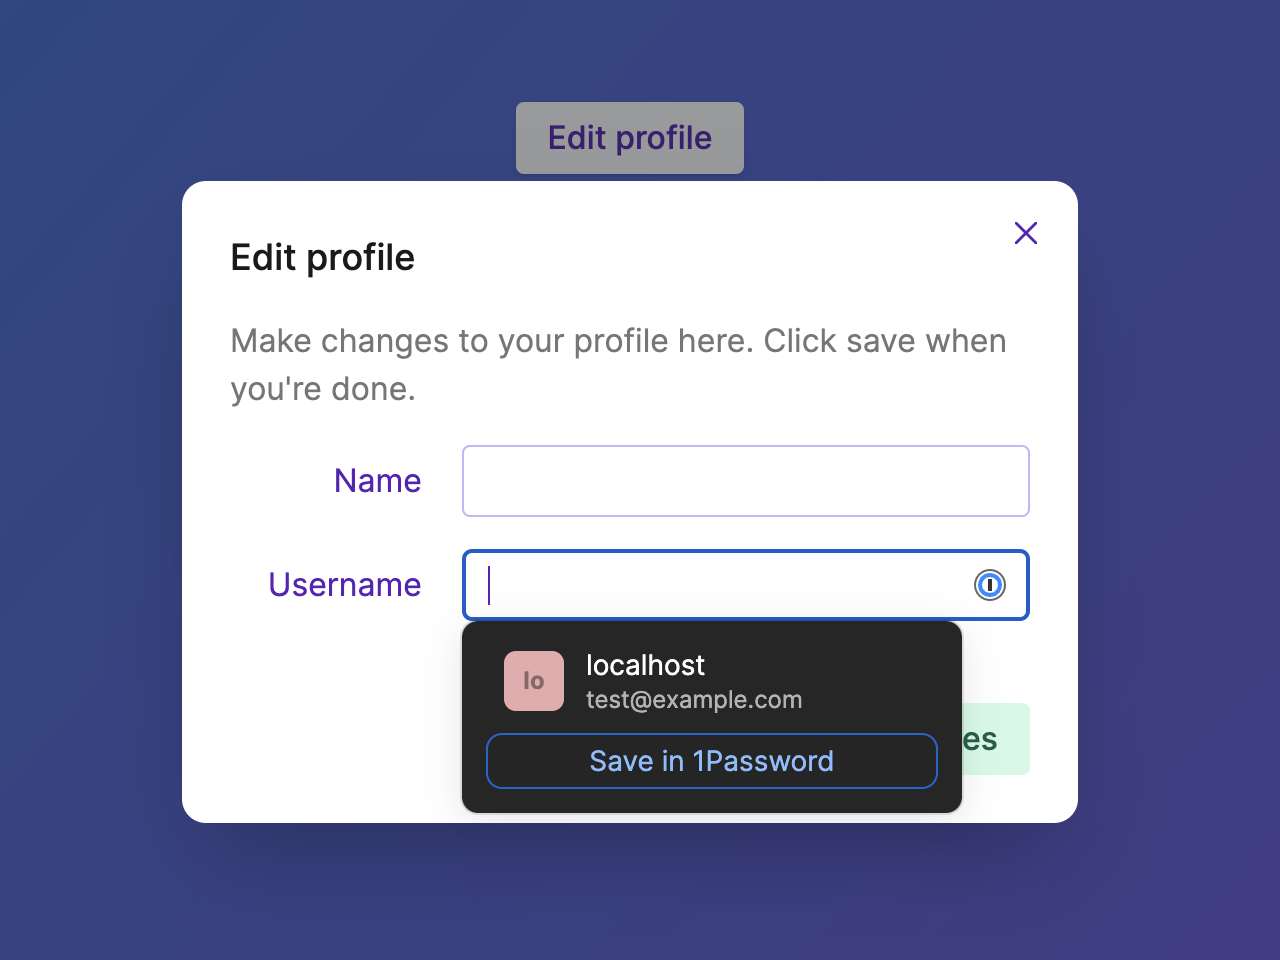 Ariakit Dialog inspired by Radix UI with keyboard focus on the username input showing the 1Password popup